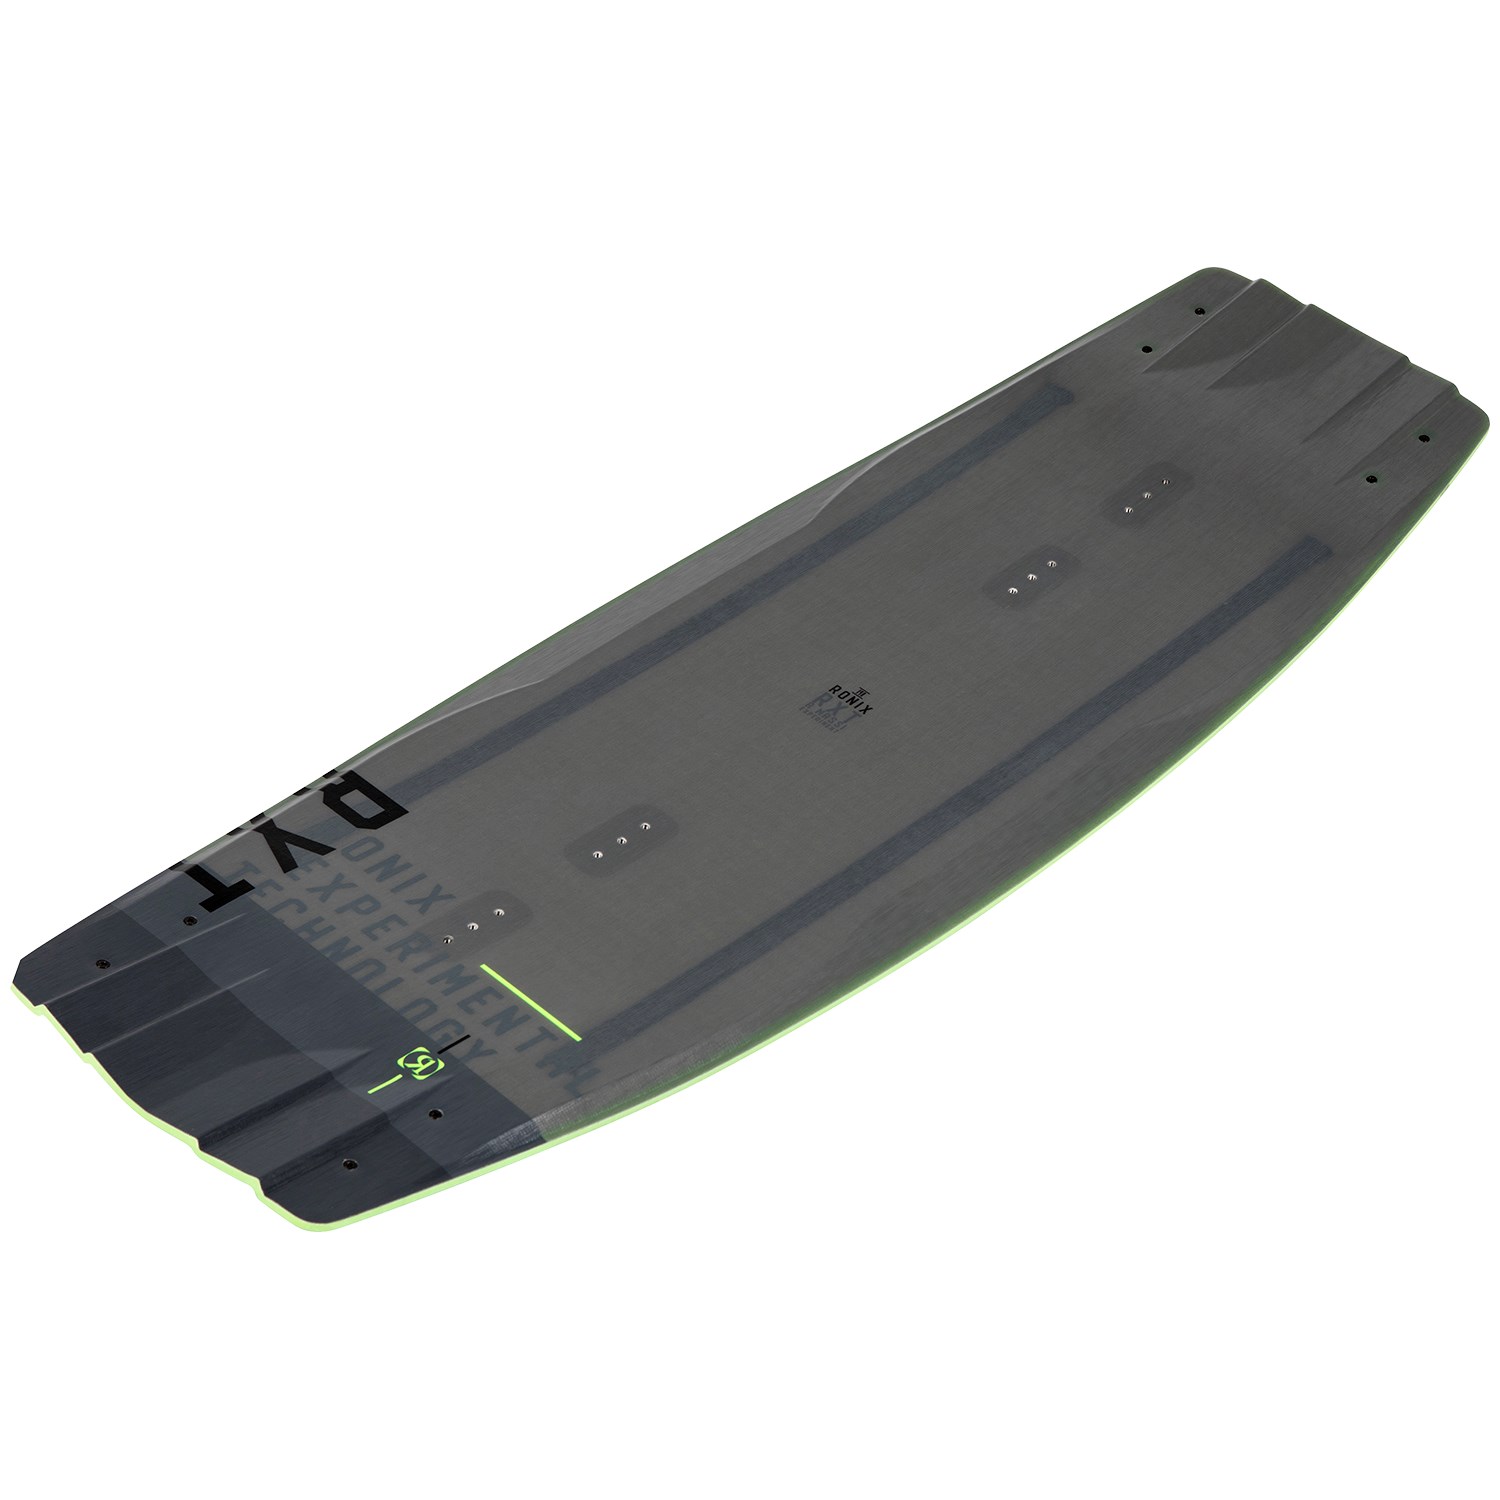 RONIX 2021 RXT Attacchi Wakeboard